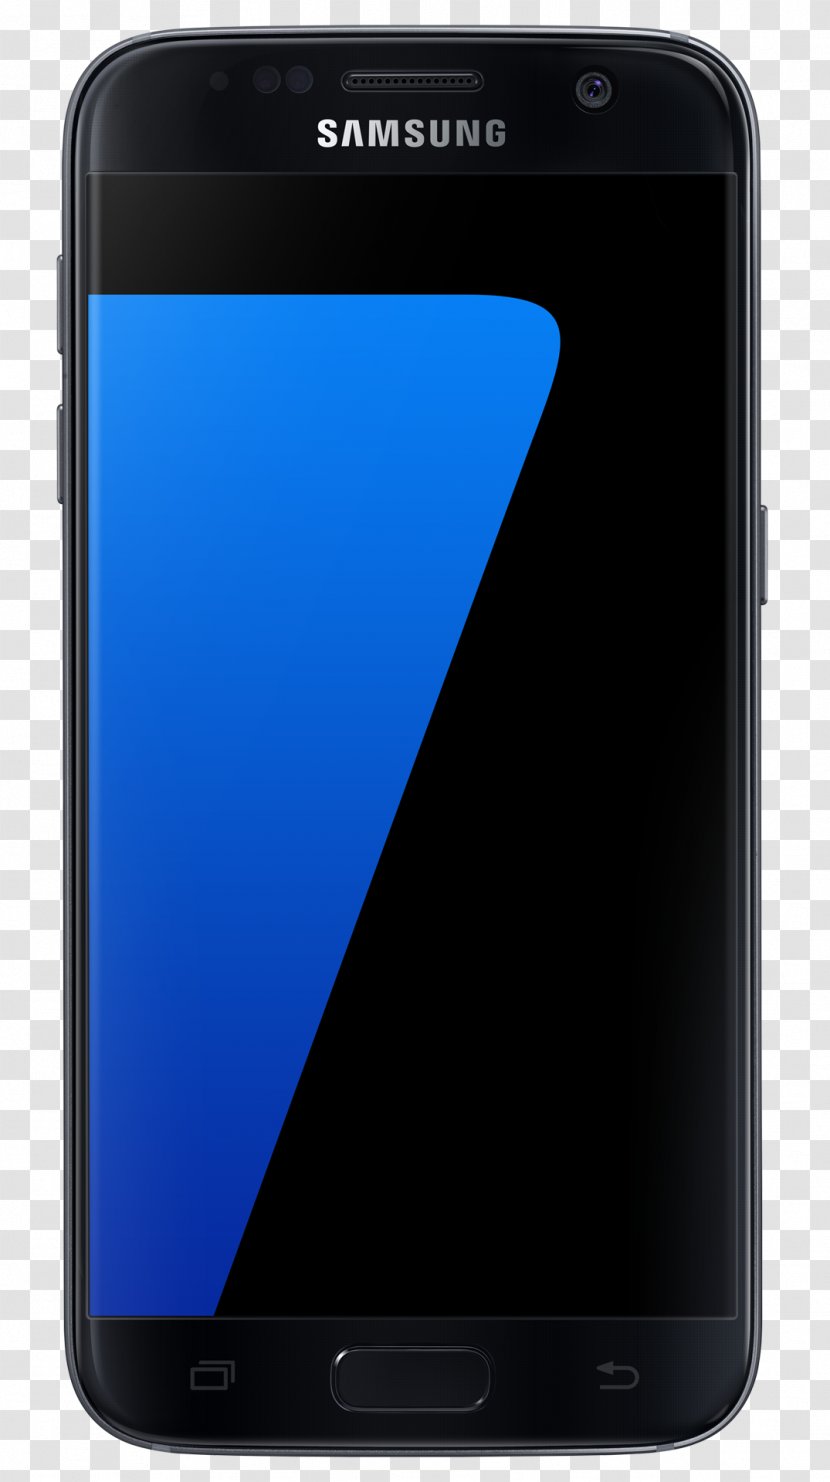 Samsung Galaxy S7 32GB, Black Smartphone Price Telephone - Mobile Shop Transparent PNG